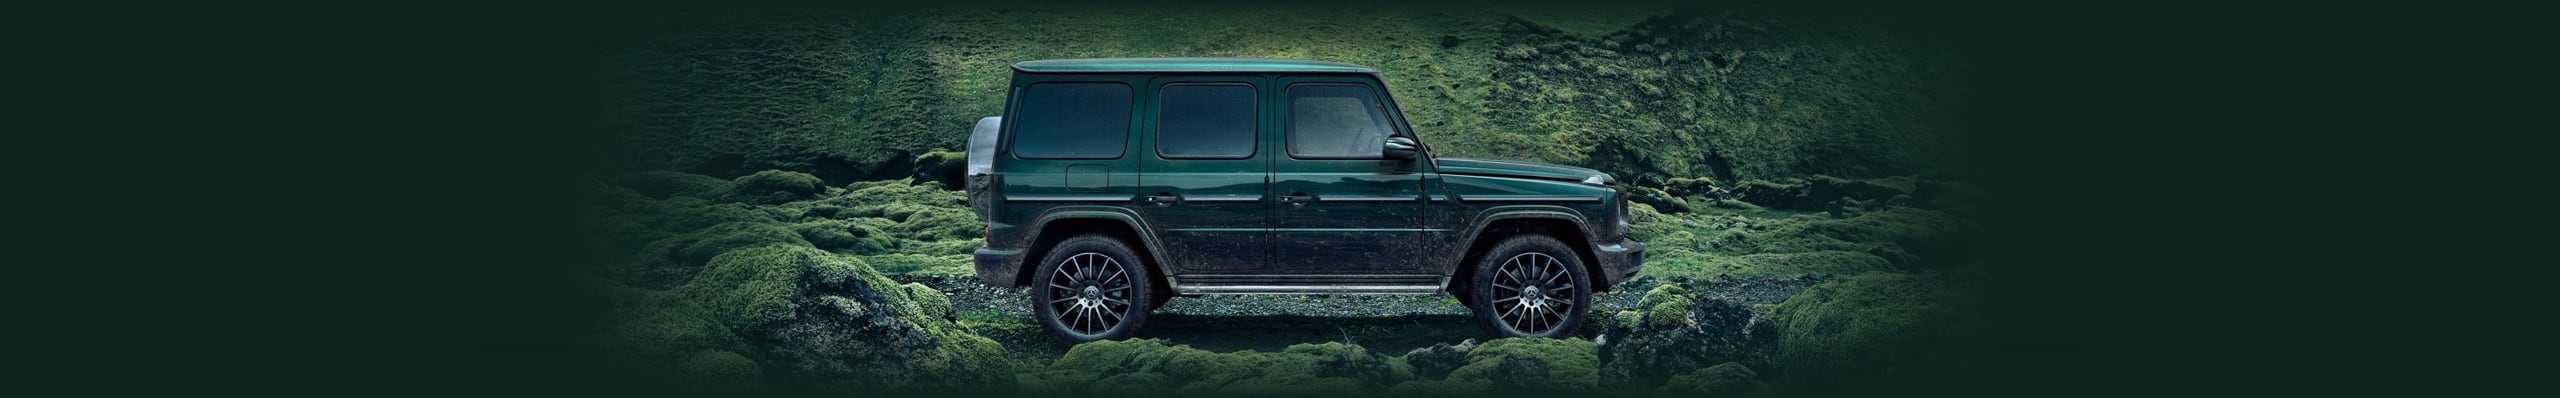 Green Mercedes-Benz G-Class model parked on gravel road